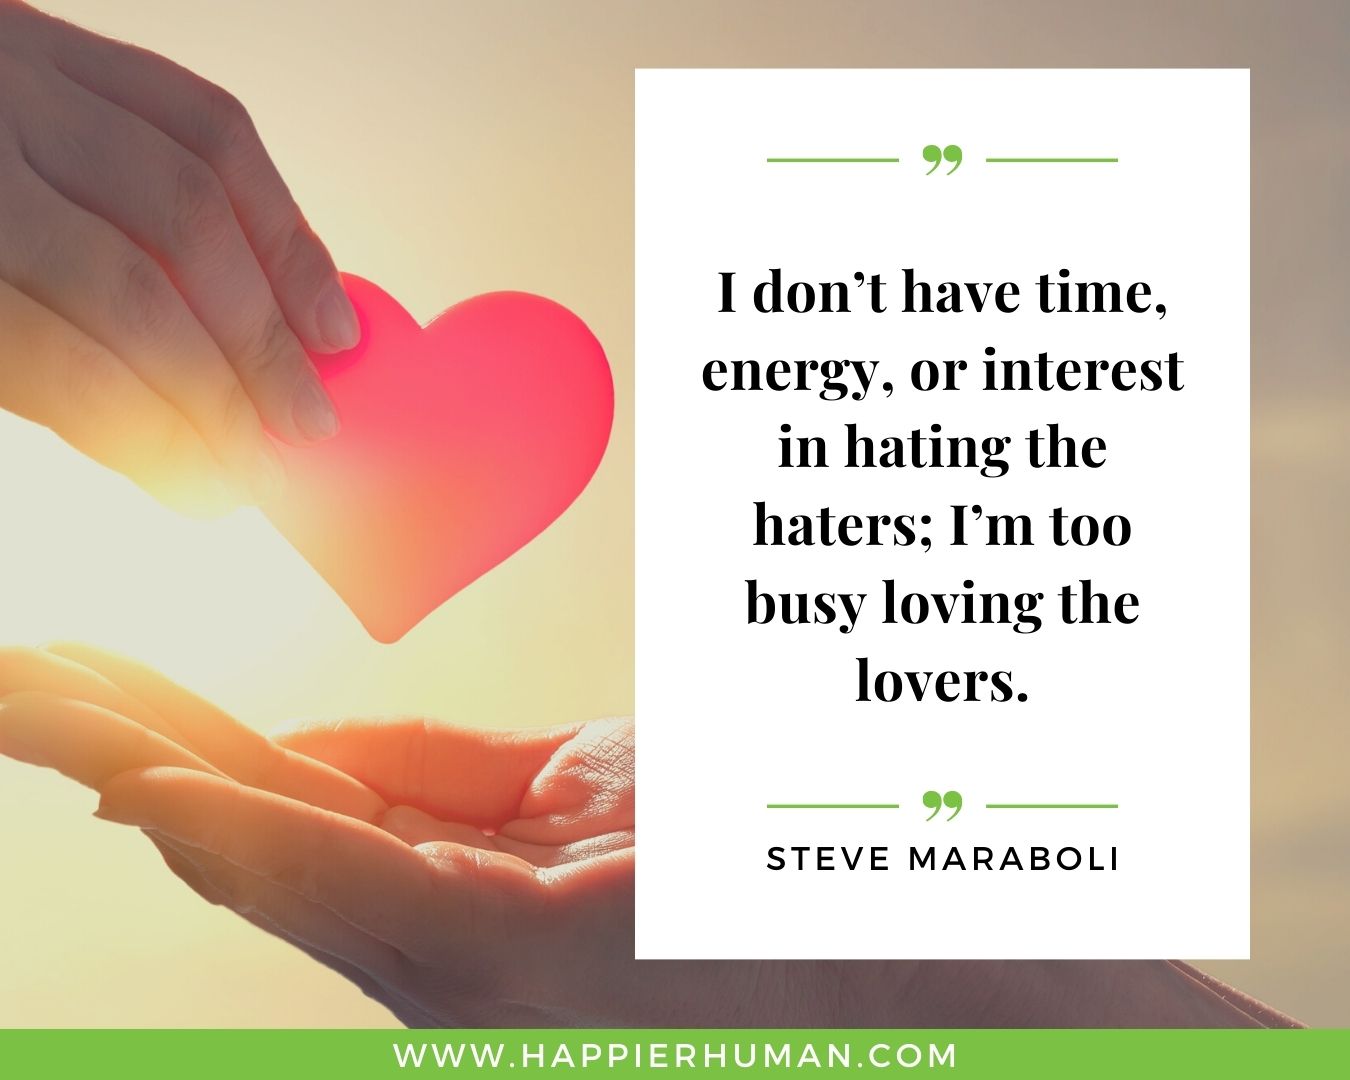 Haters Quotes - “I don’t have time, energy, or interest in hating the haters; I’m too busy loving the lovers.” – Steve Maraboli